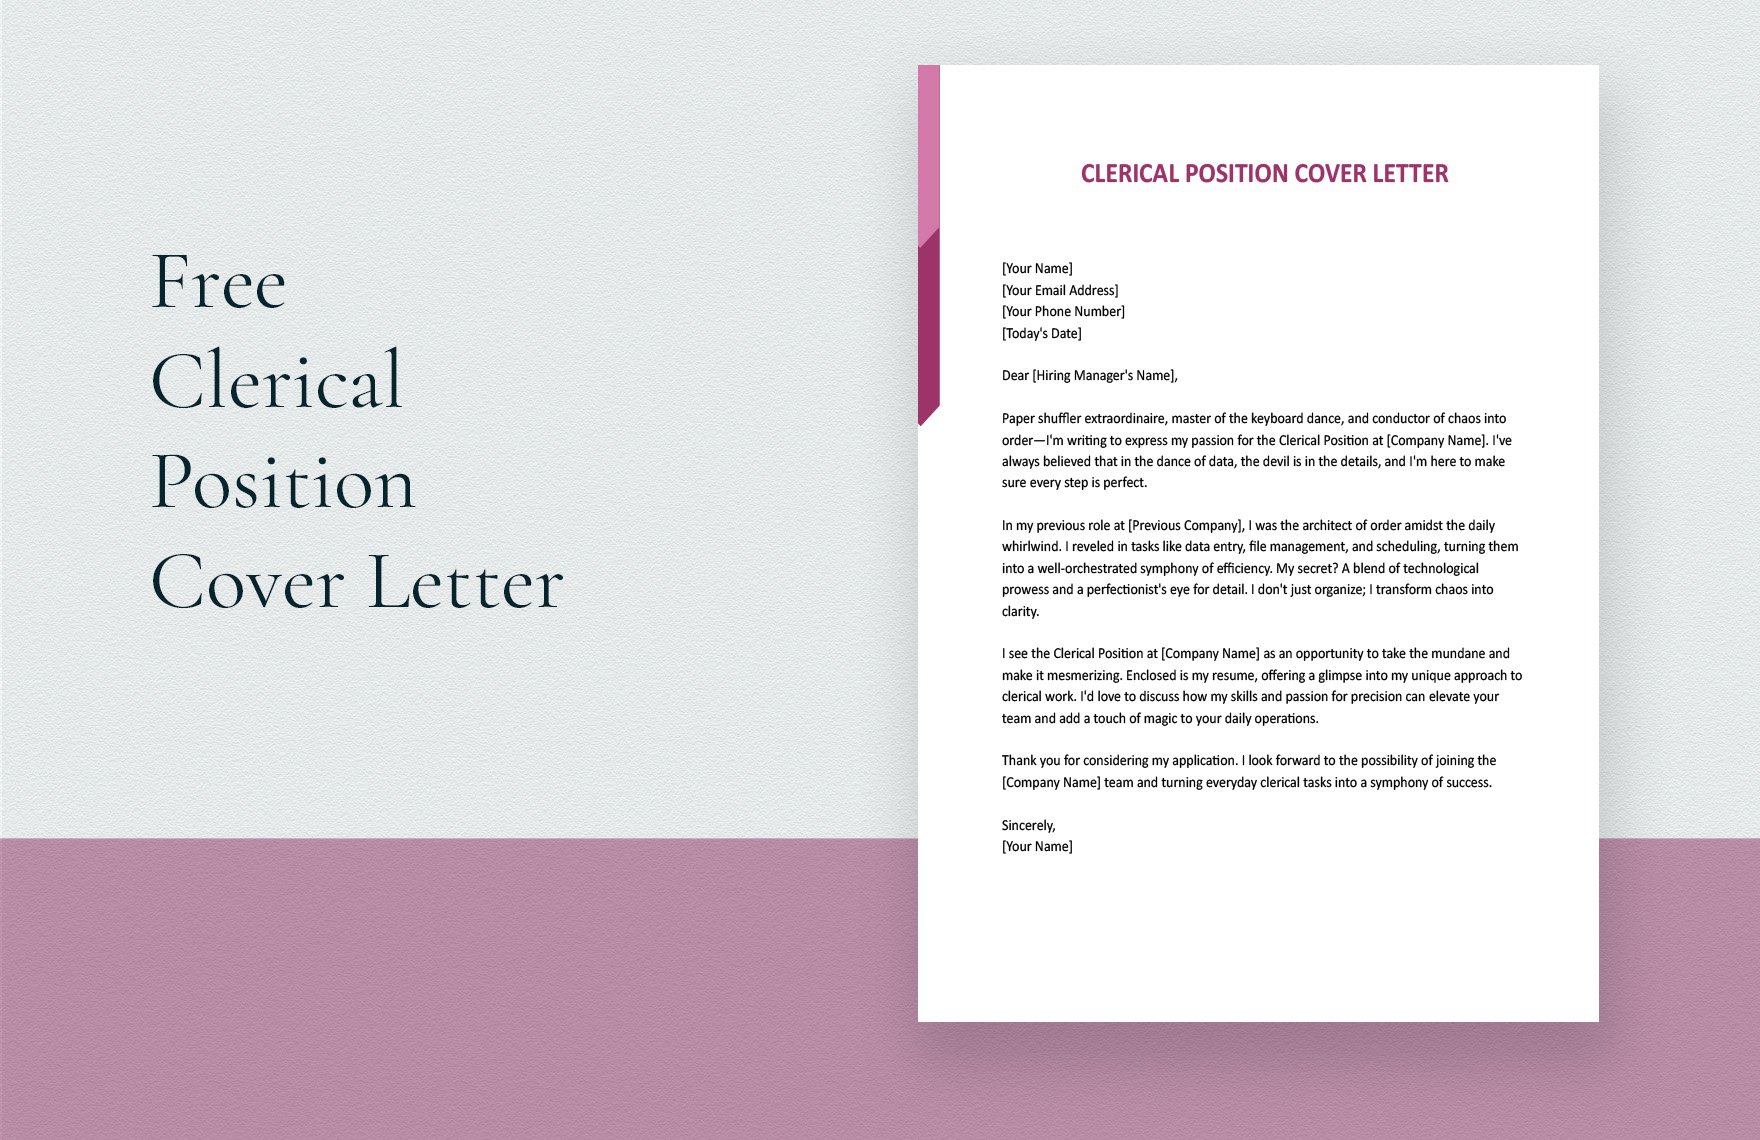 Clerical Position Cover Letter in Word, Google Docs